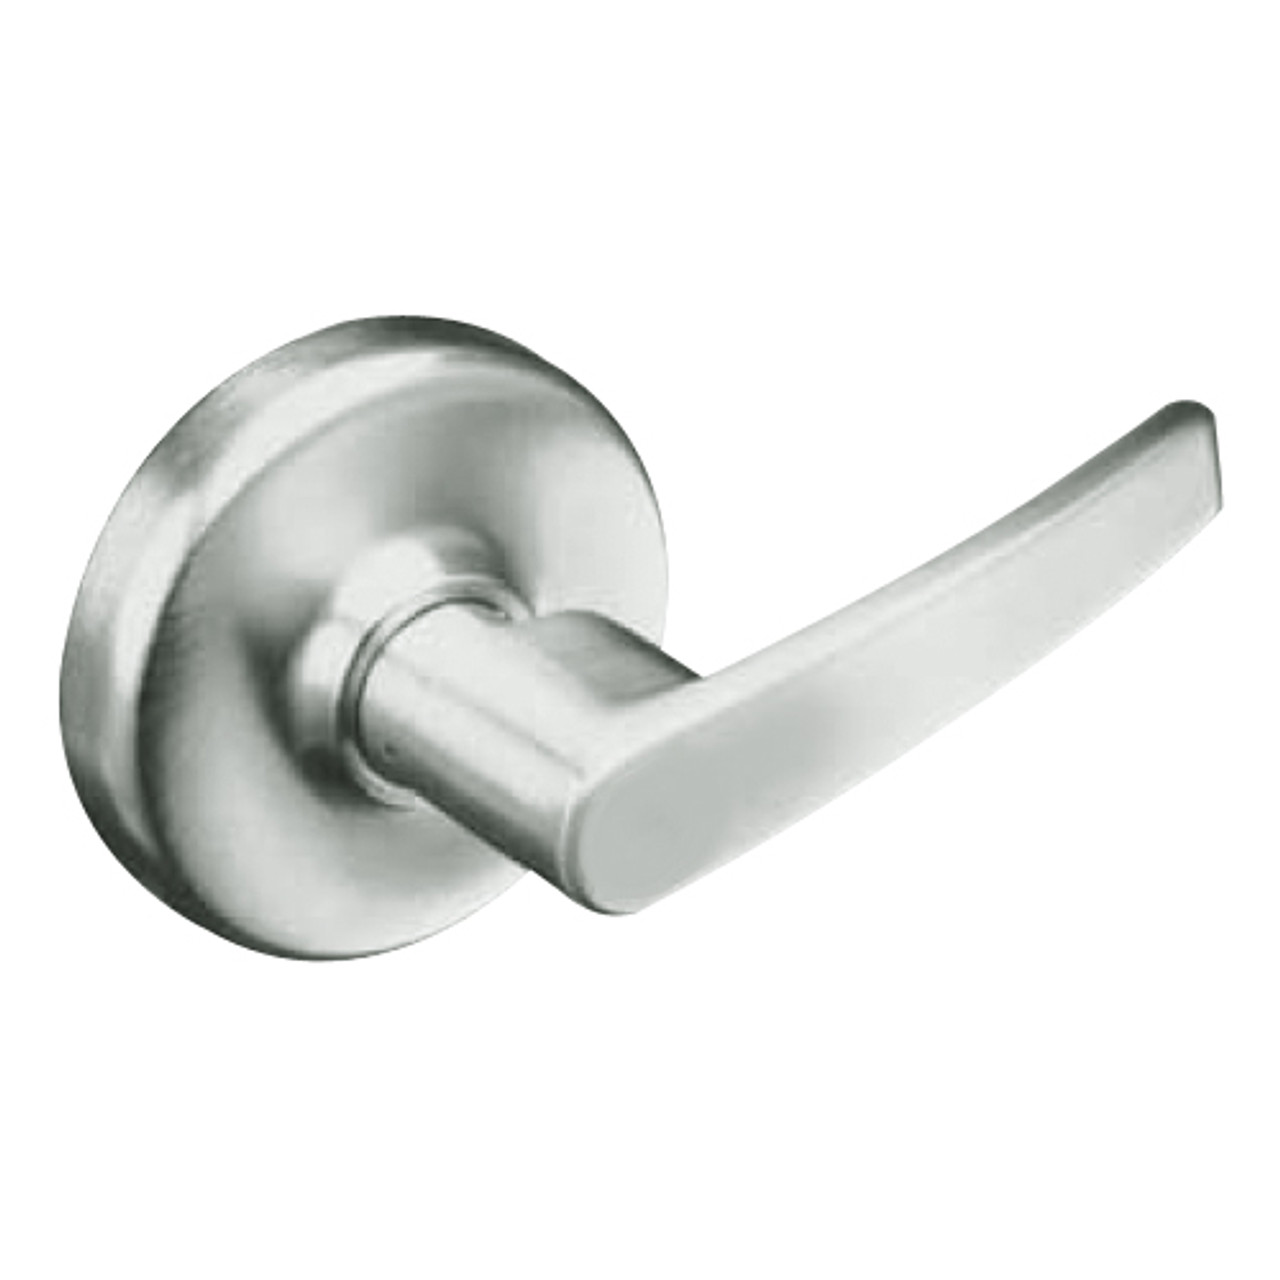 CL3120-AZD-618 Corbin CL3100 Series Vandal Resistant Privacy Cylindrical Locksets with Armstrong Lever in Bright Nickel Plated Finish